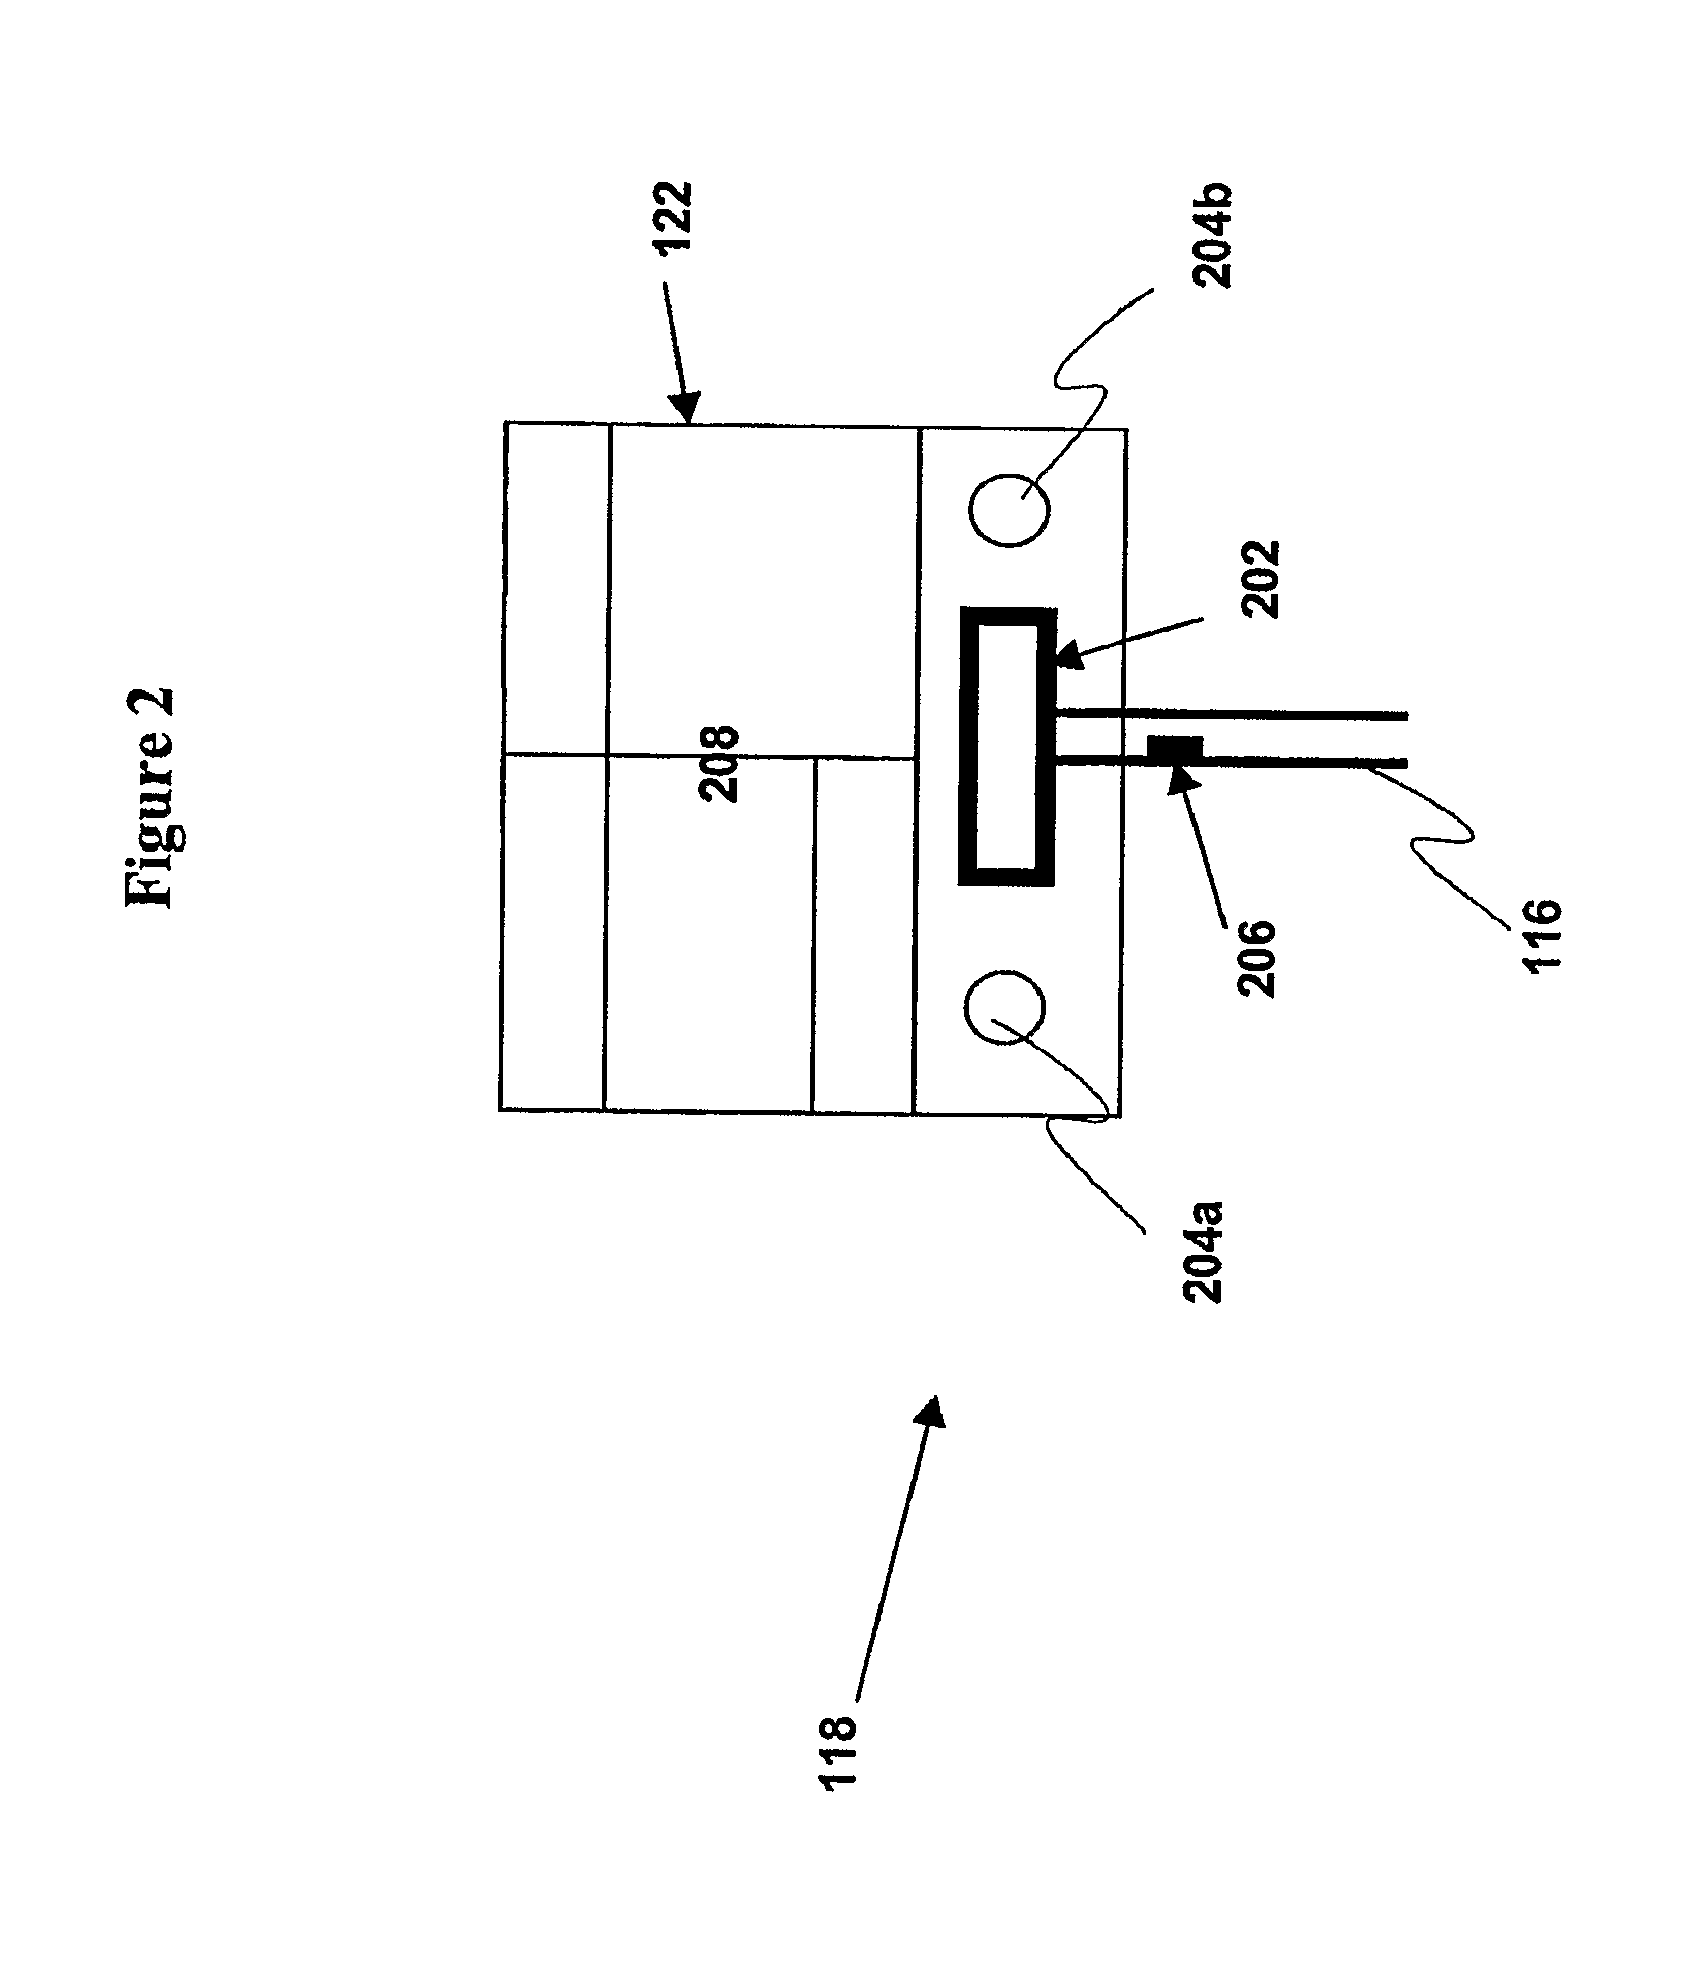 Systems and Methods for Monitoring and Controlling Internal Pressure of an Eye or Body Part